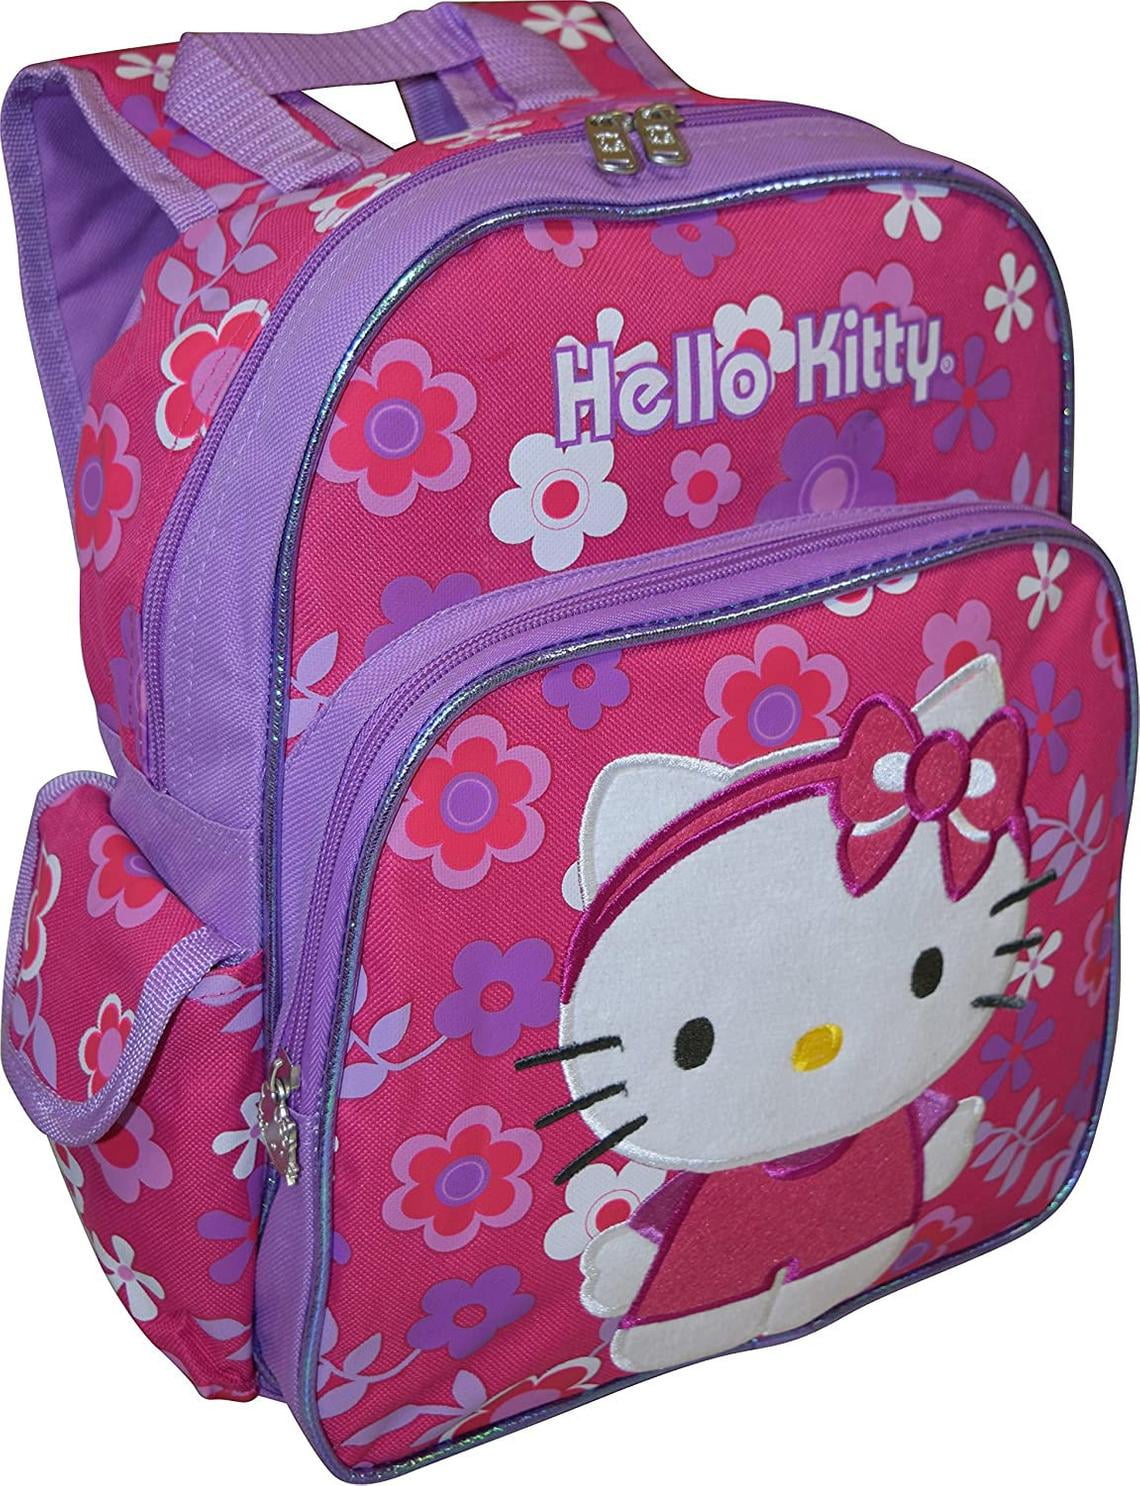 Hello Kitty Flower Shop Deluxe Embroidered 12 inch School Bag Backpack